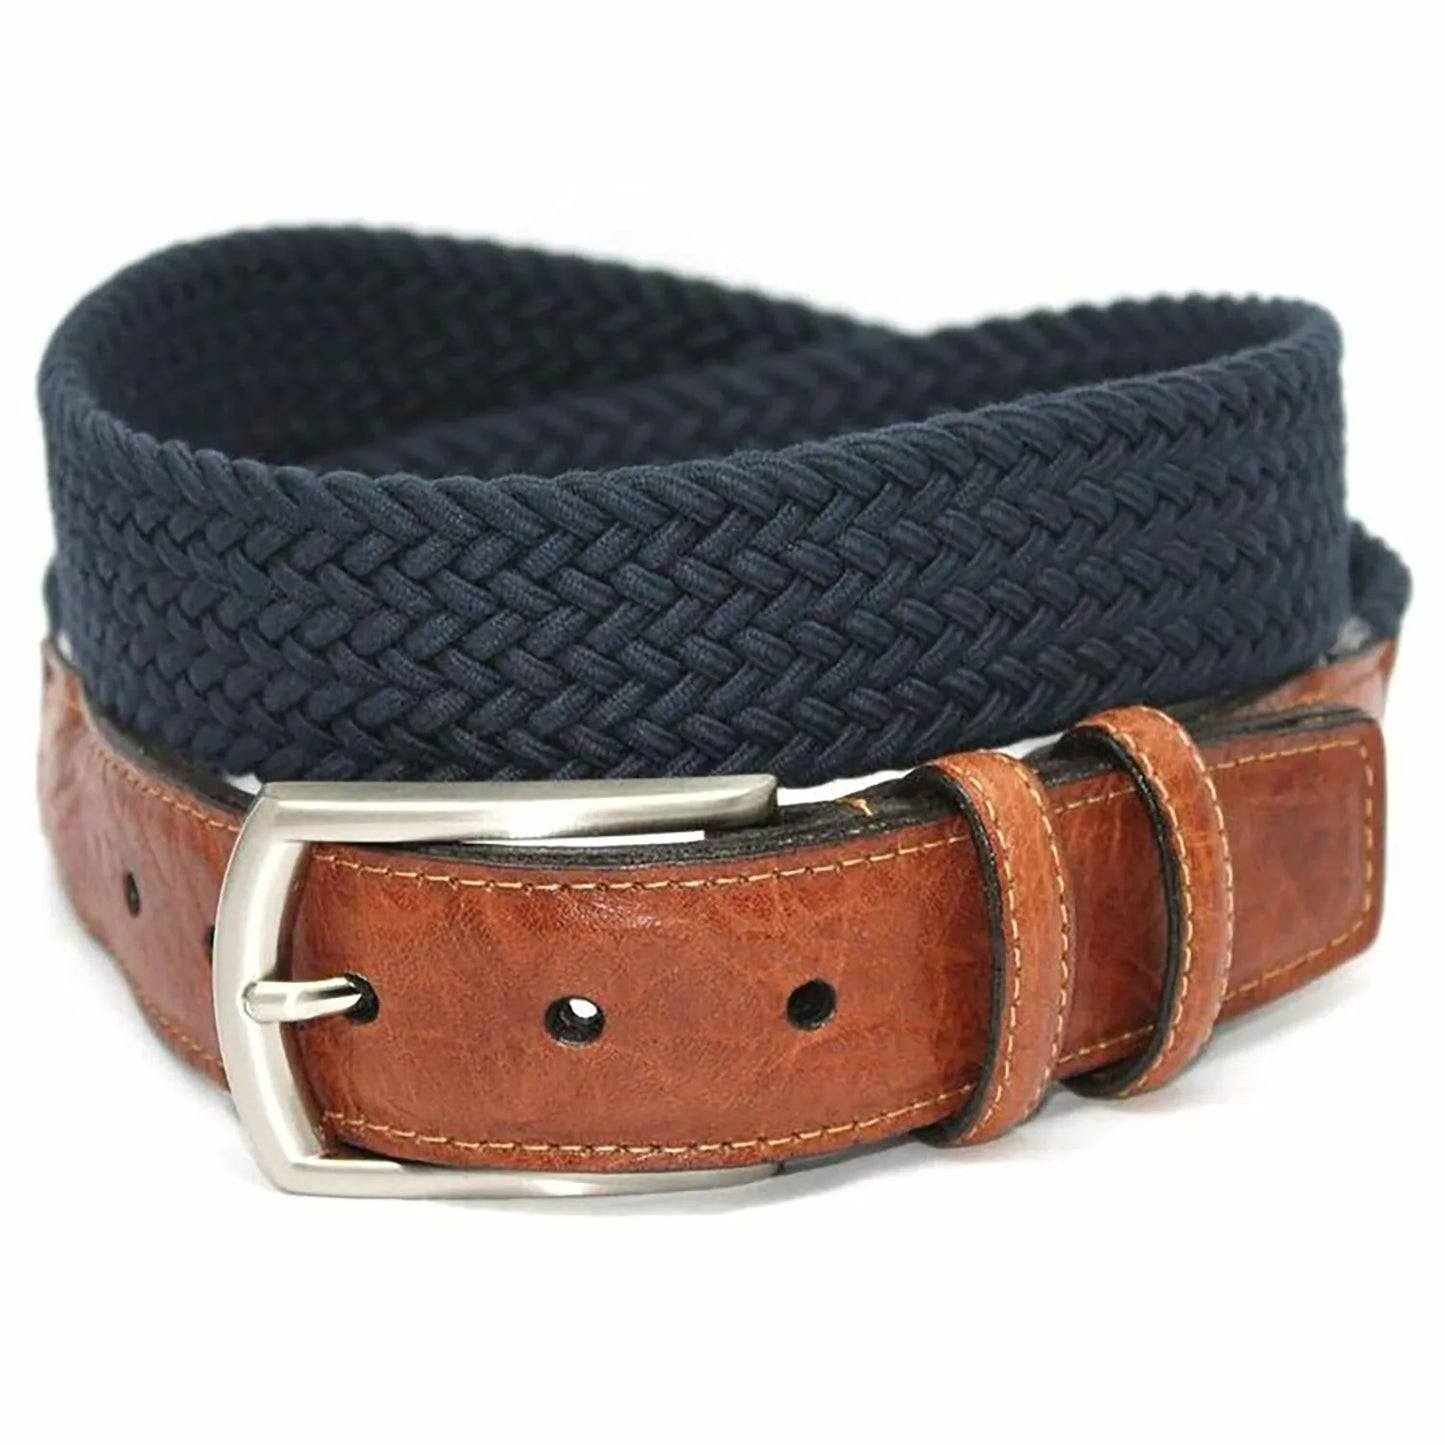 Torino Cotton Elastic Belt with Leather Tabs (5 Colors)